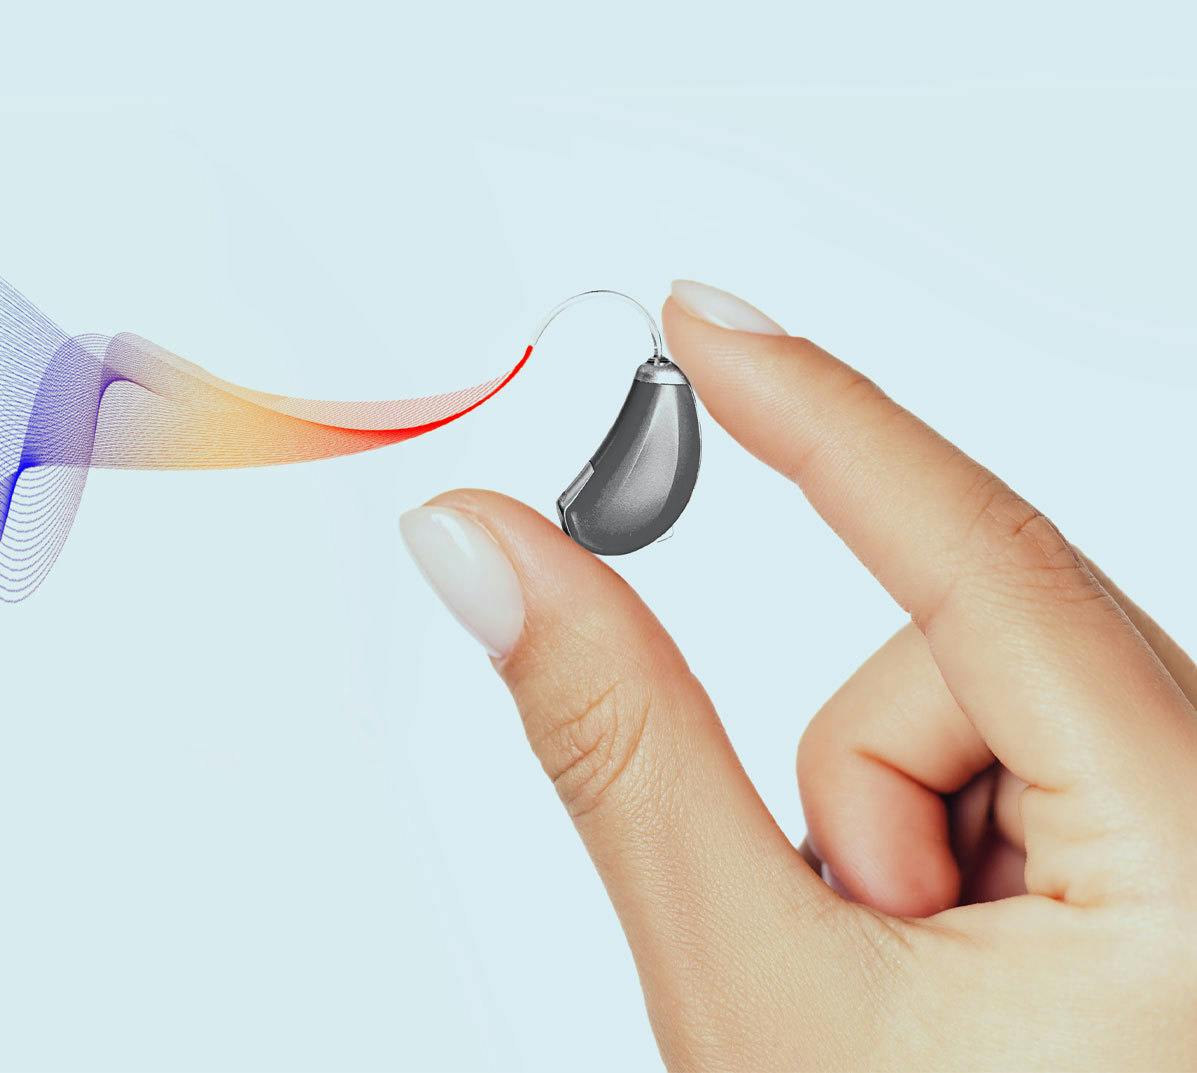 Hand holding an hearing aid